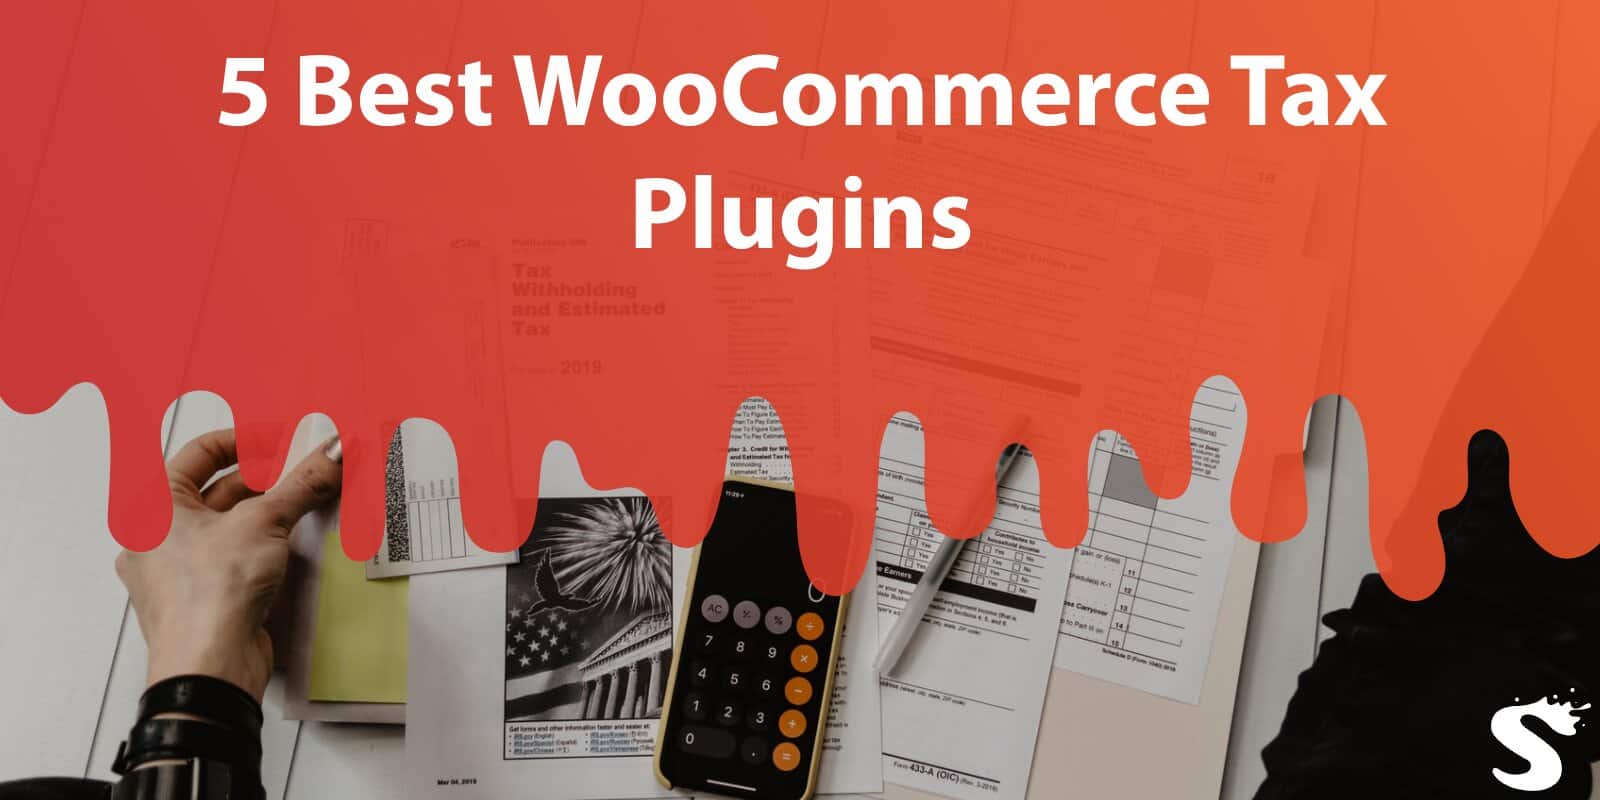 5 Best WooCommerce Tax Plugins for Automation and Rates